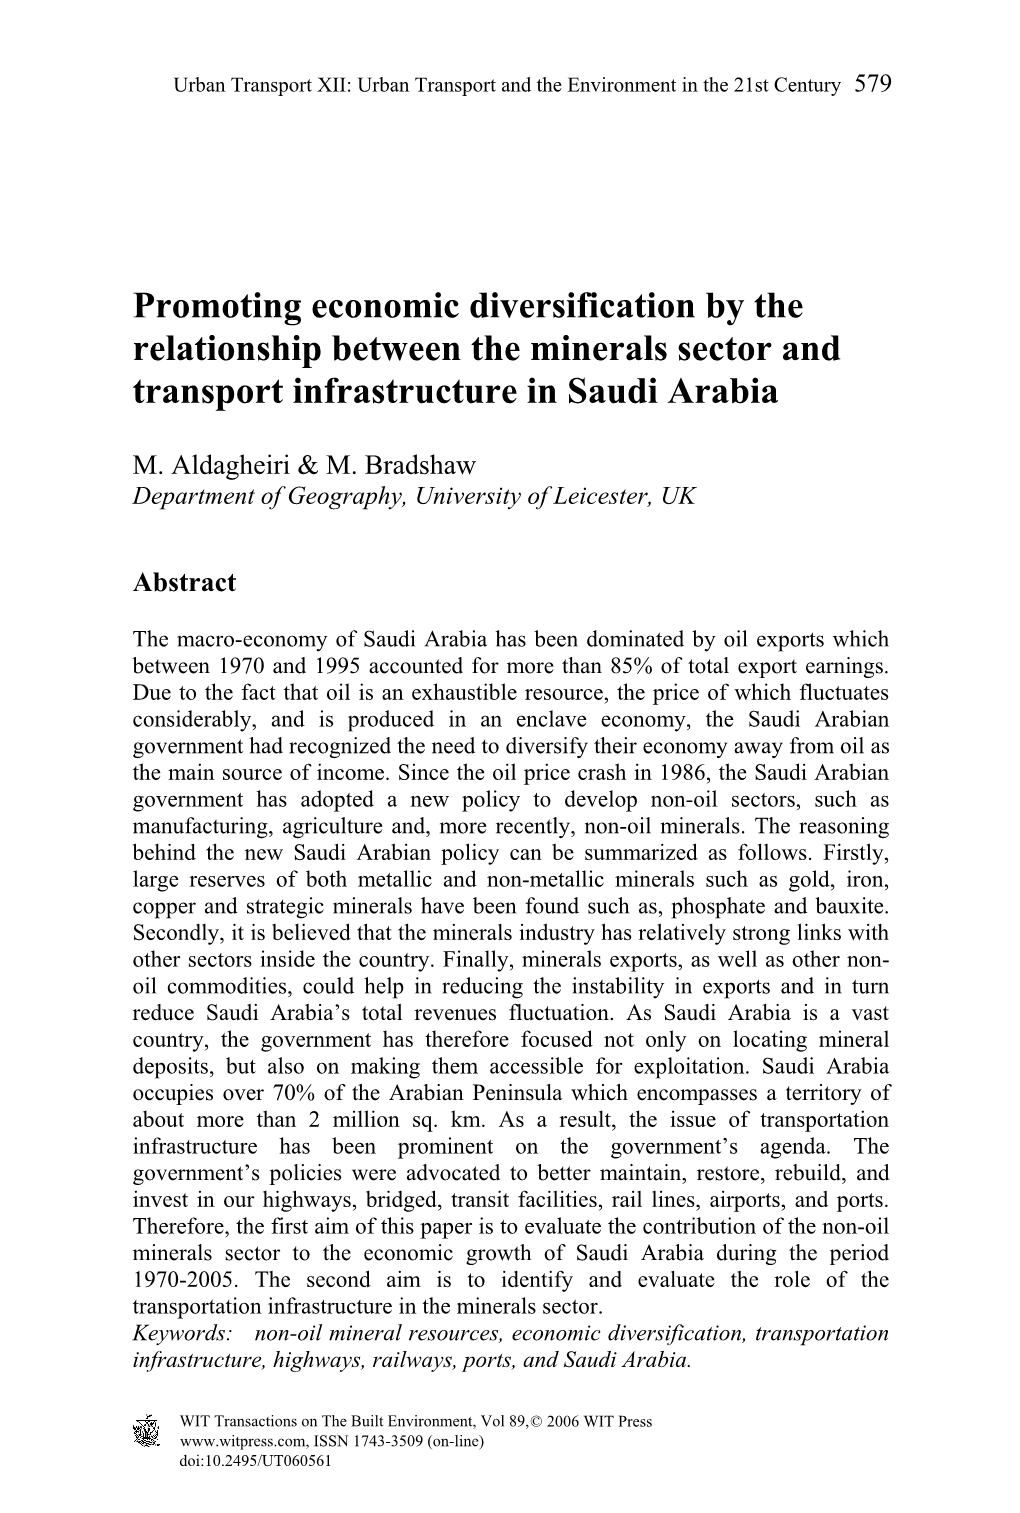 Promoting Economic Diversification by the Relationship Between the Minerals Sector and Transport Infrastructure in Saudi Arabia